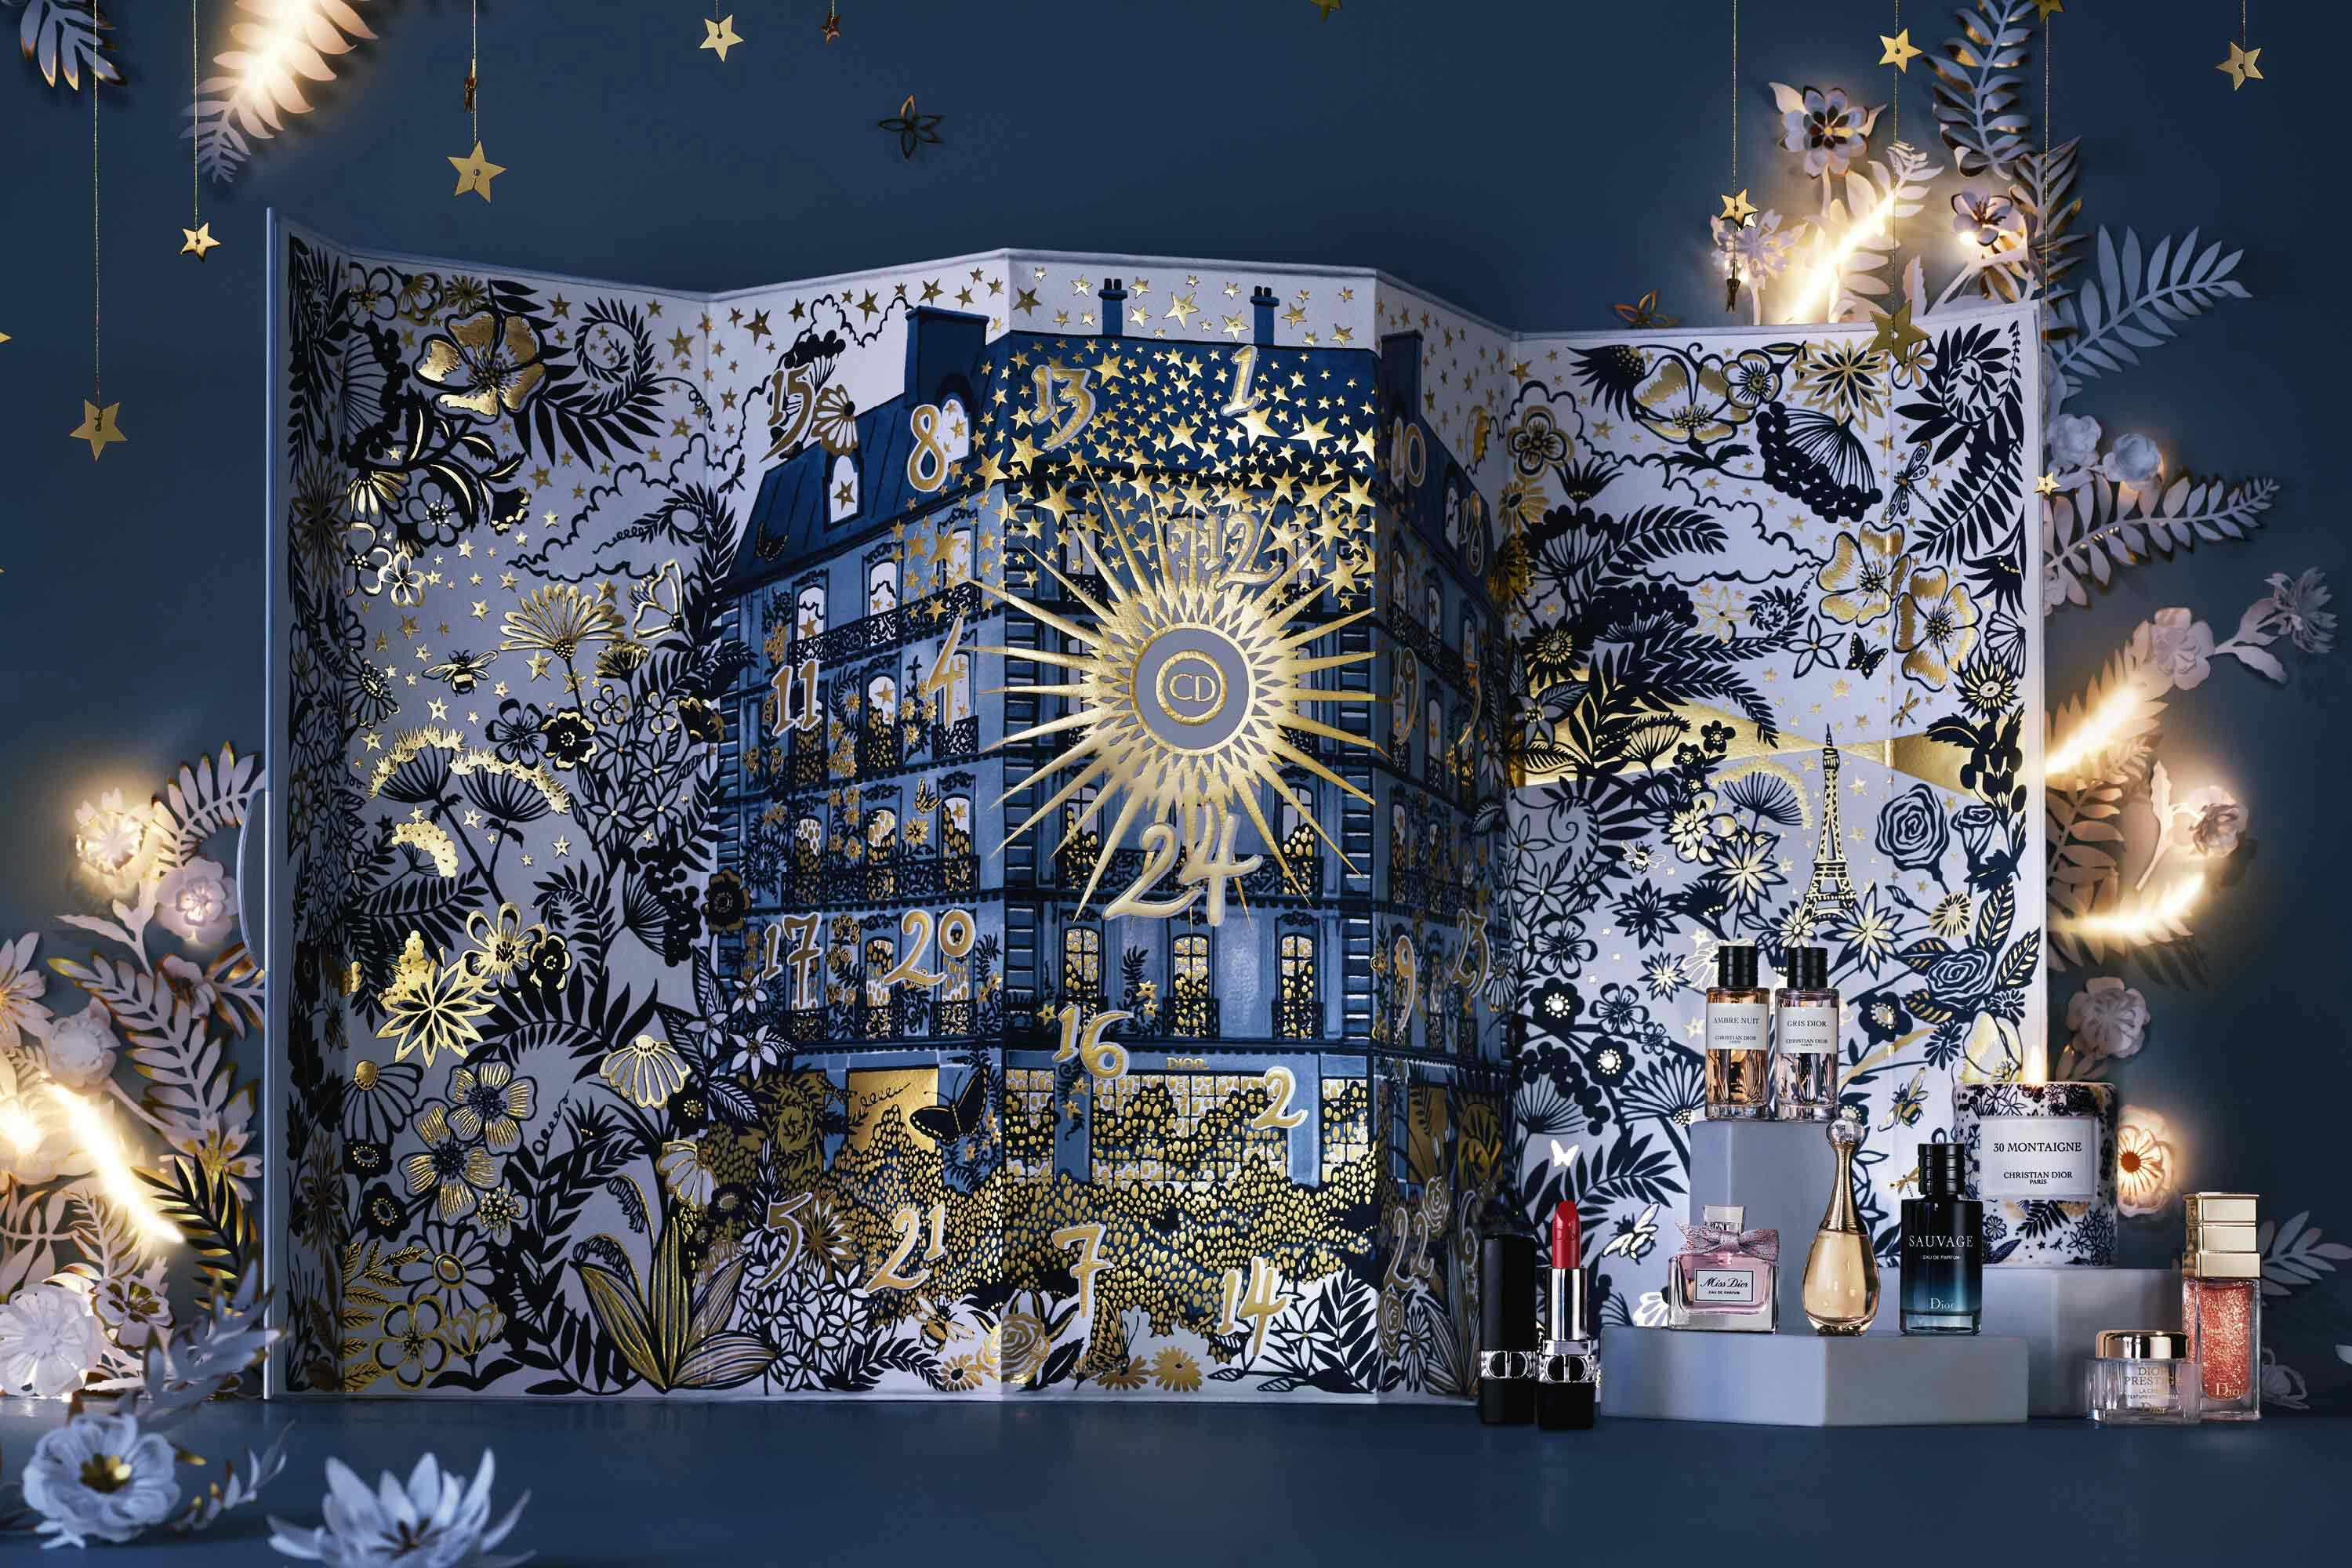 Best Fashion & Beauty Advent Calendars to Gift This Holiday Season